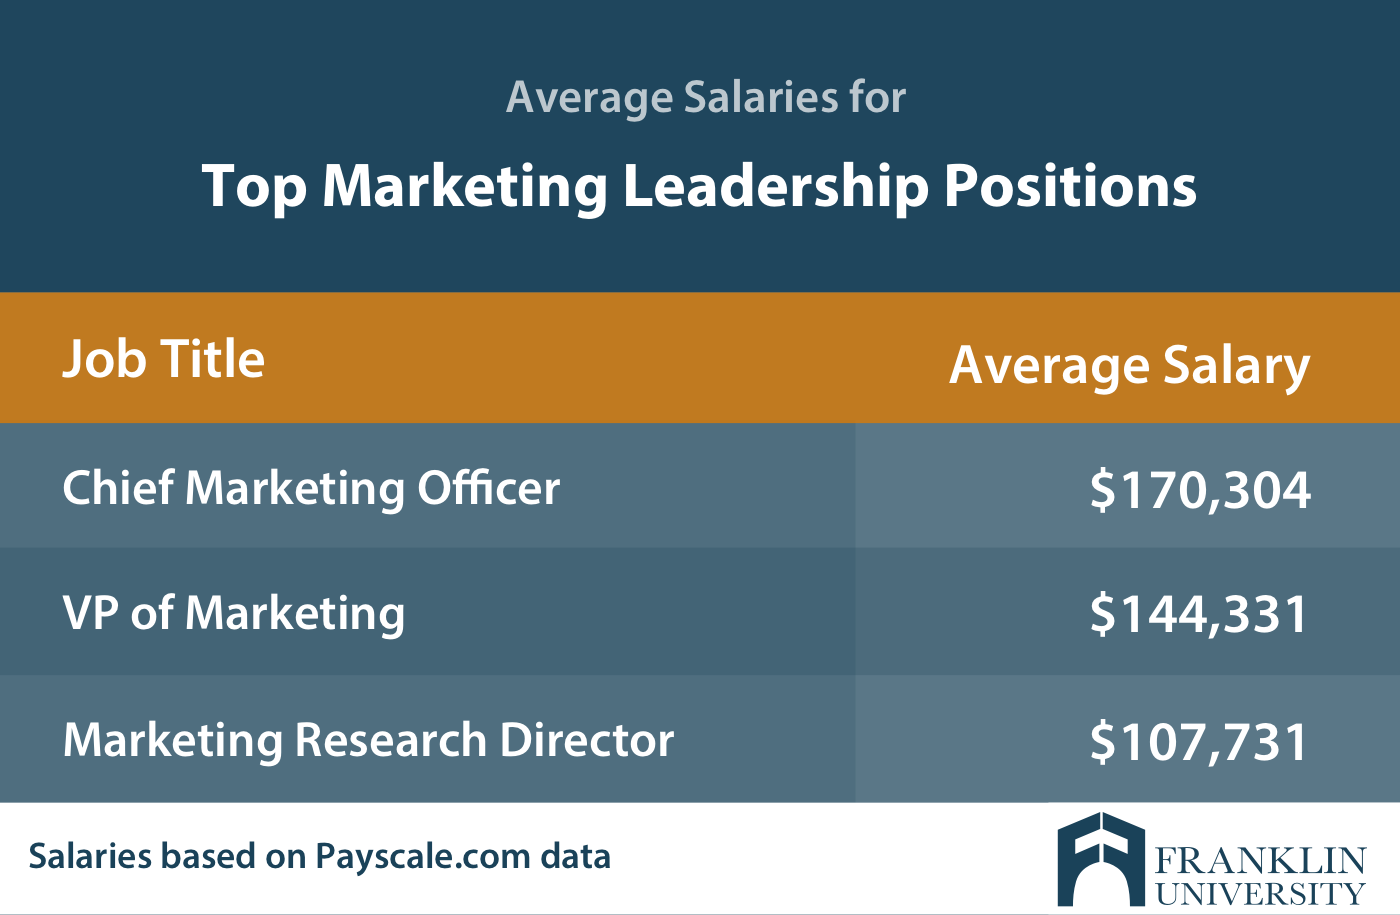 graphic describing the average salaries for top marketing leadership positions